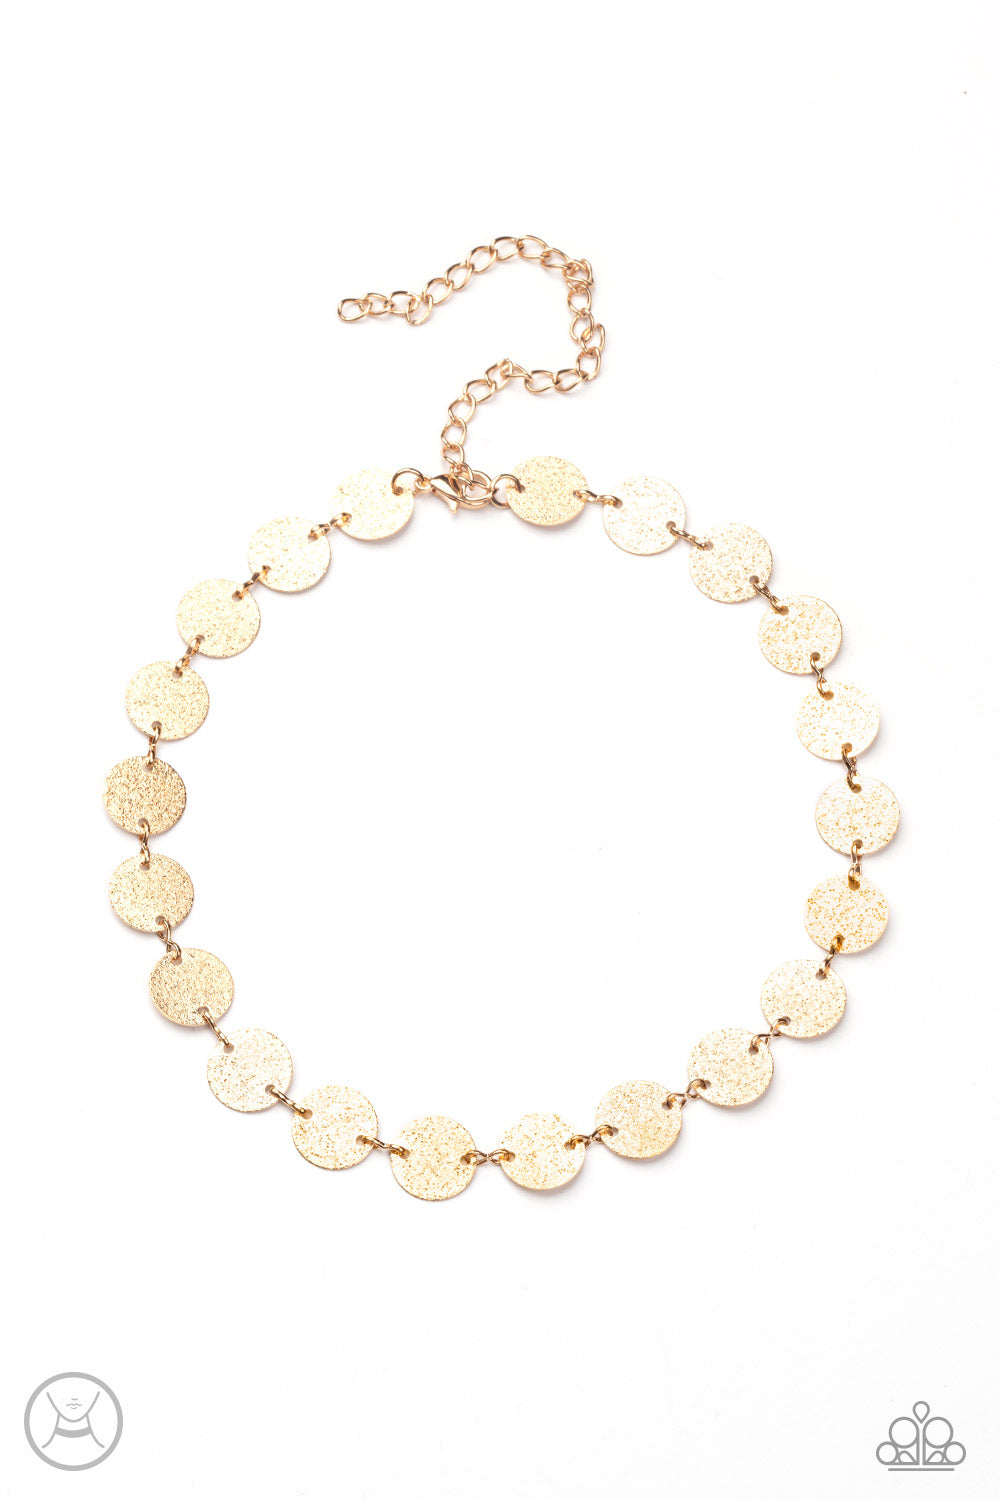 Reflection Detection Gold Choker Necklace - Paparazzi Accessories  Hammered in shimmery detail, a shiny collection of dainty gold discs delicately link into a blinding display around the neck. Features an adjustable clasp closure.  Sold as one individual choker necklace. Includes one pair of matching earrings.